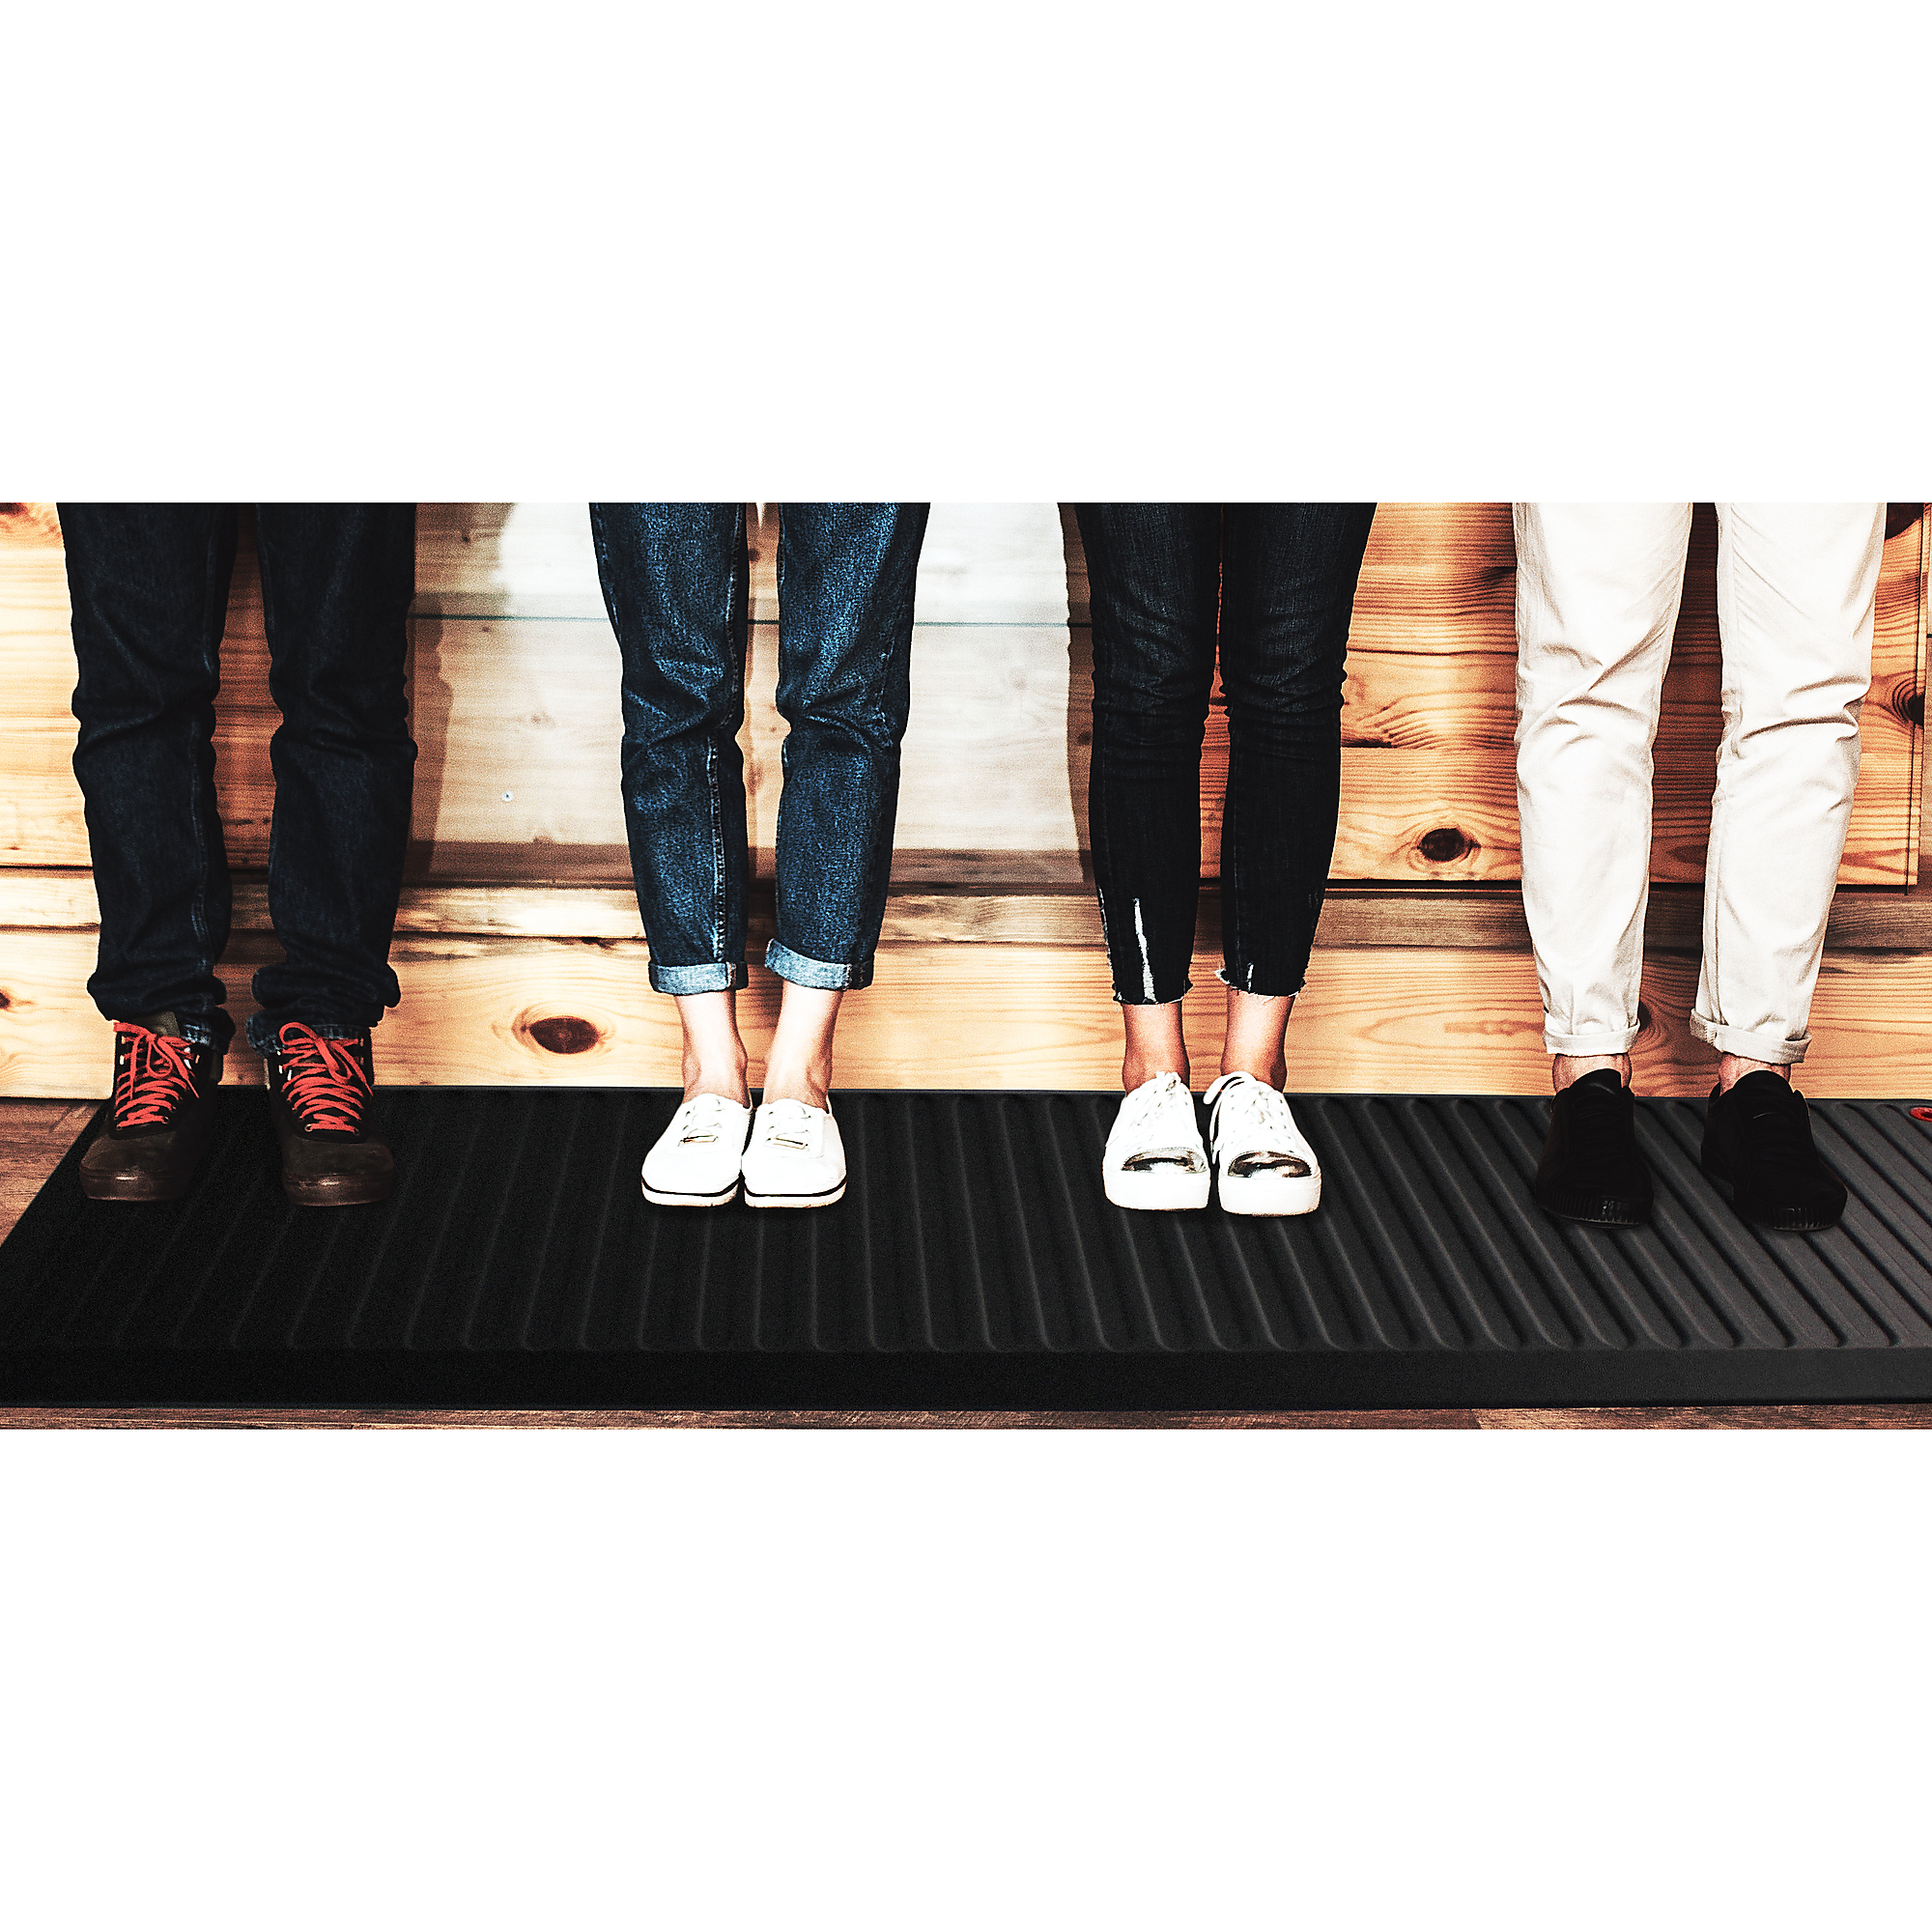 Eco-Pro by GelPro Continuous Comfort Anti-Fatigue Mat for